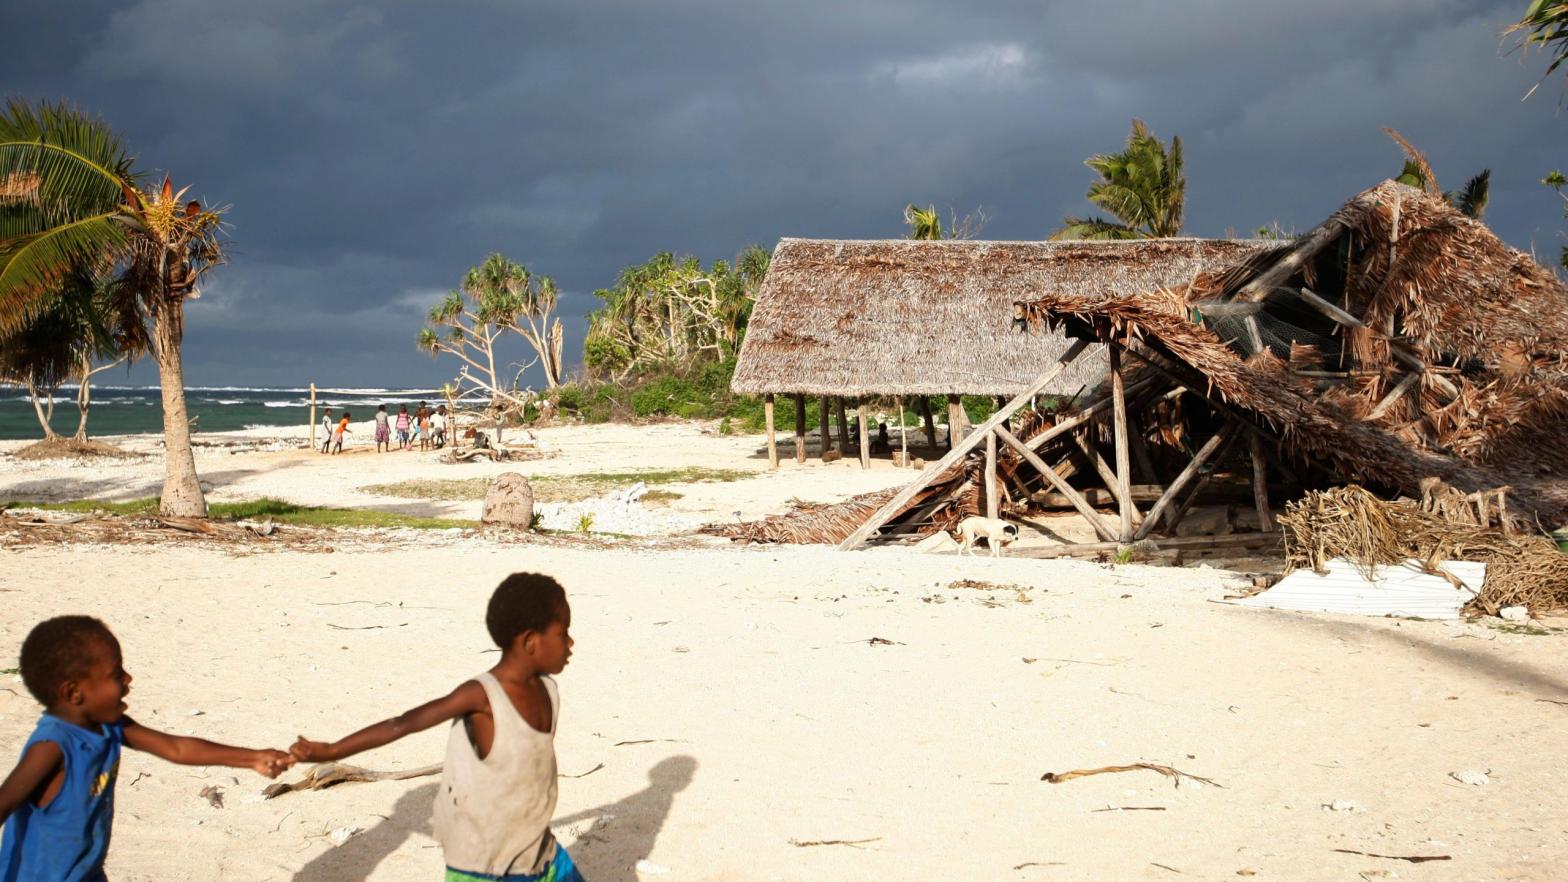 In this Saturday, May 30, 2015, photo, children play on the beach in the town of Takara, on Efate Island, Vanuatu. The town was damaged during Cyclone Pam.  (Photo: Nick Perry, AP)